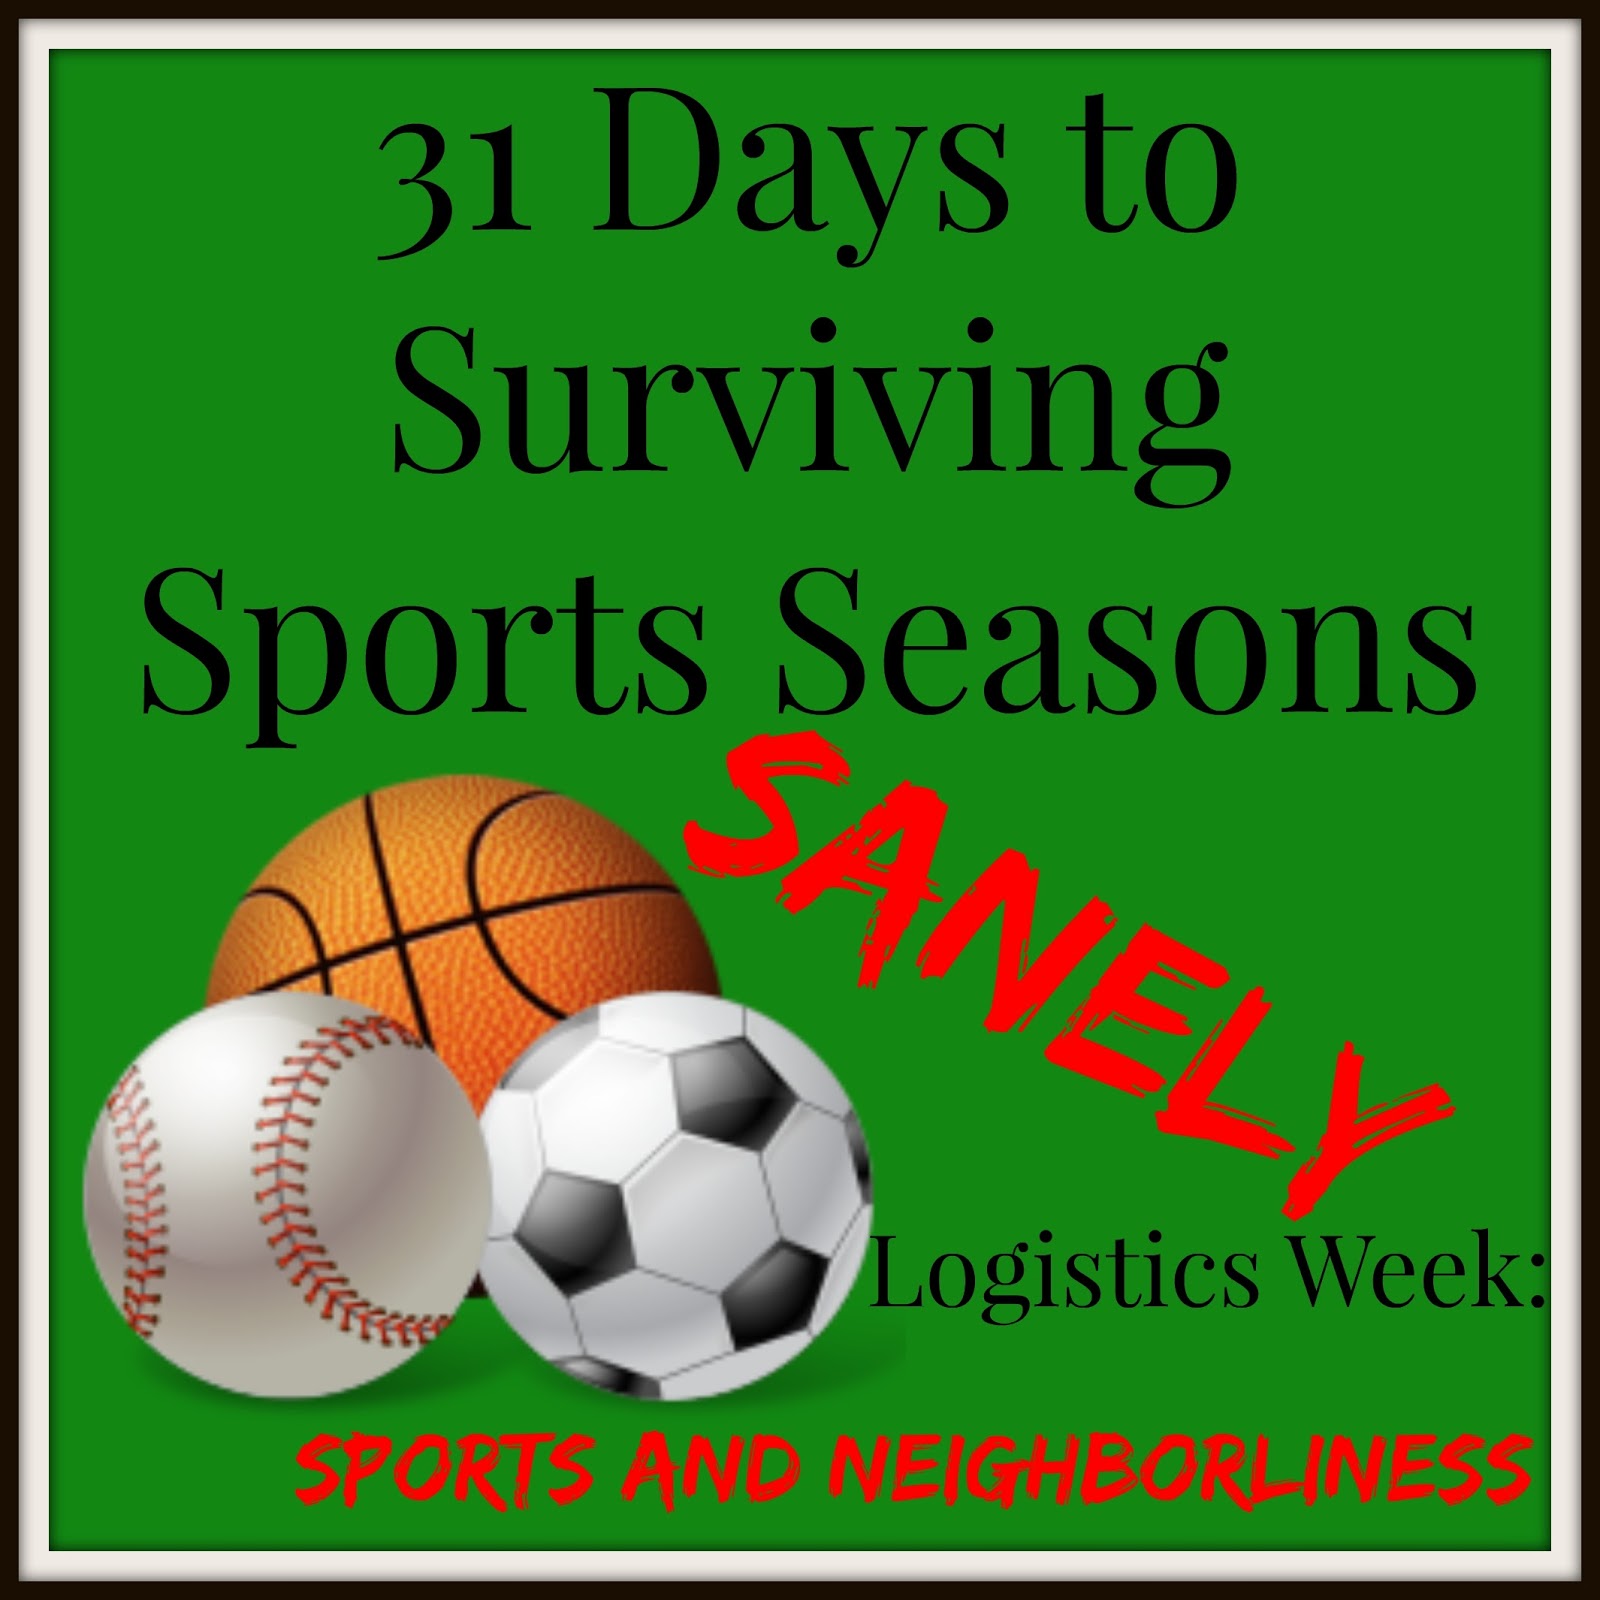 31 Days to Surviving Sports Seasons Sanely: Sports and Neighborliness